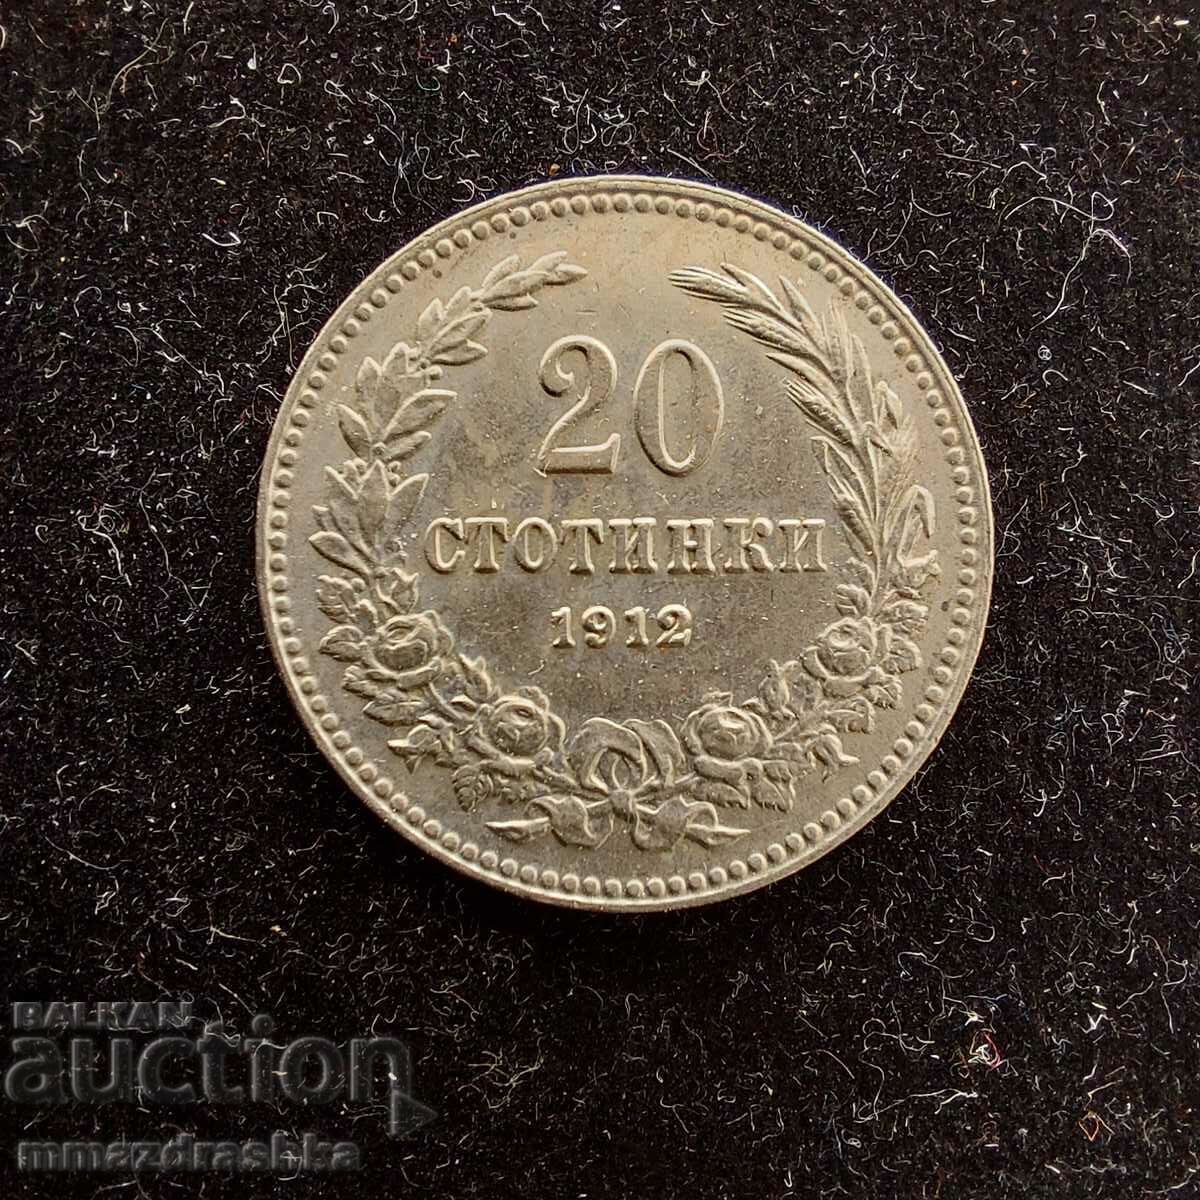 20 cents, 1912